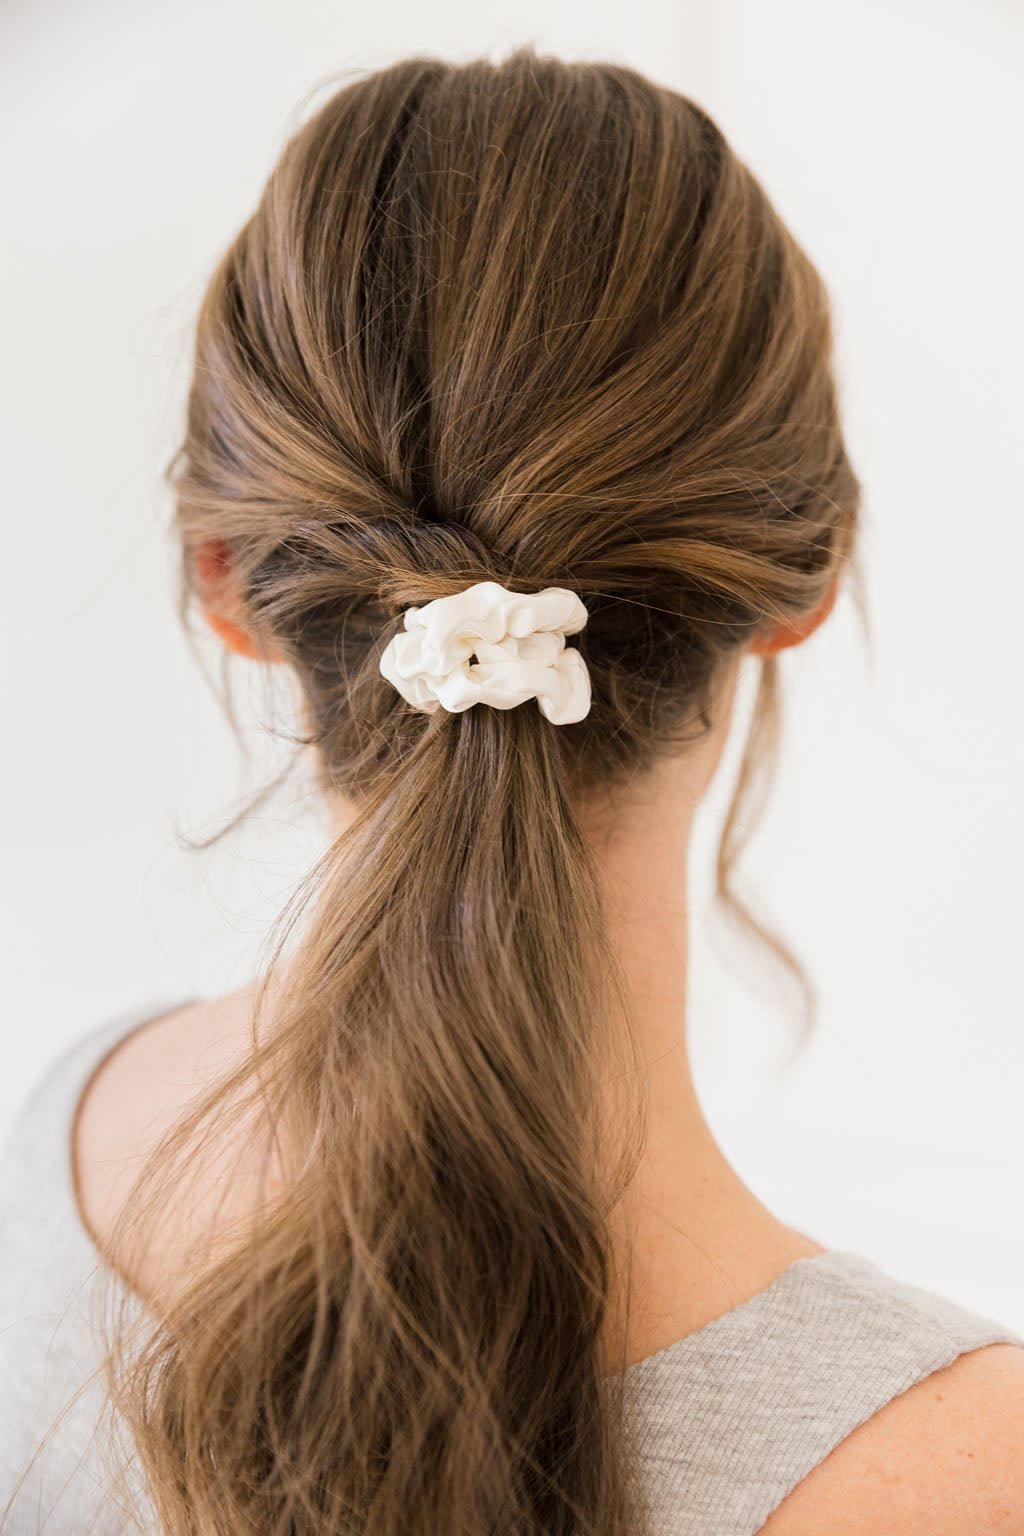 A person with long brown hair styled into a low, loose ponytail secured by a Cozy Earth Silk Skinny Scrunchie. The individual is wearing a light gray sleeveless top and is photographed from the back against a blurred, light background.